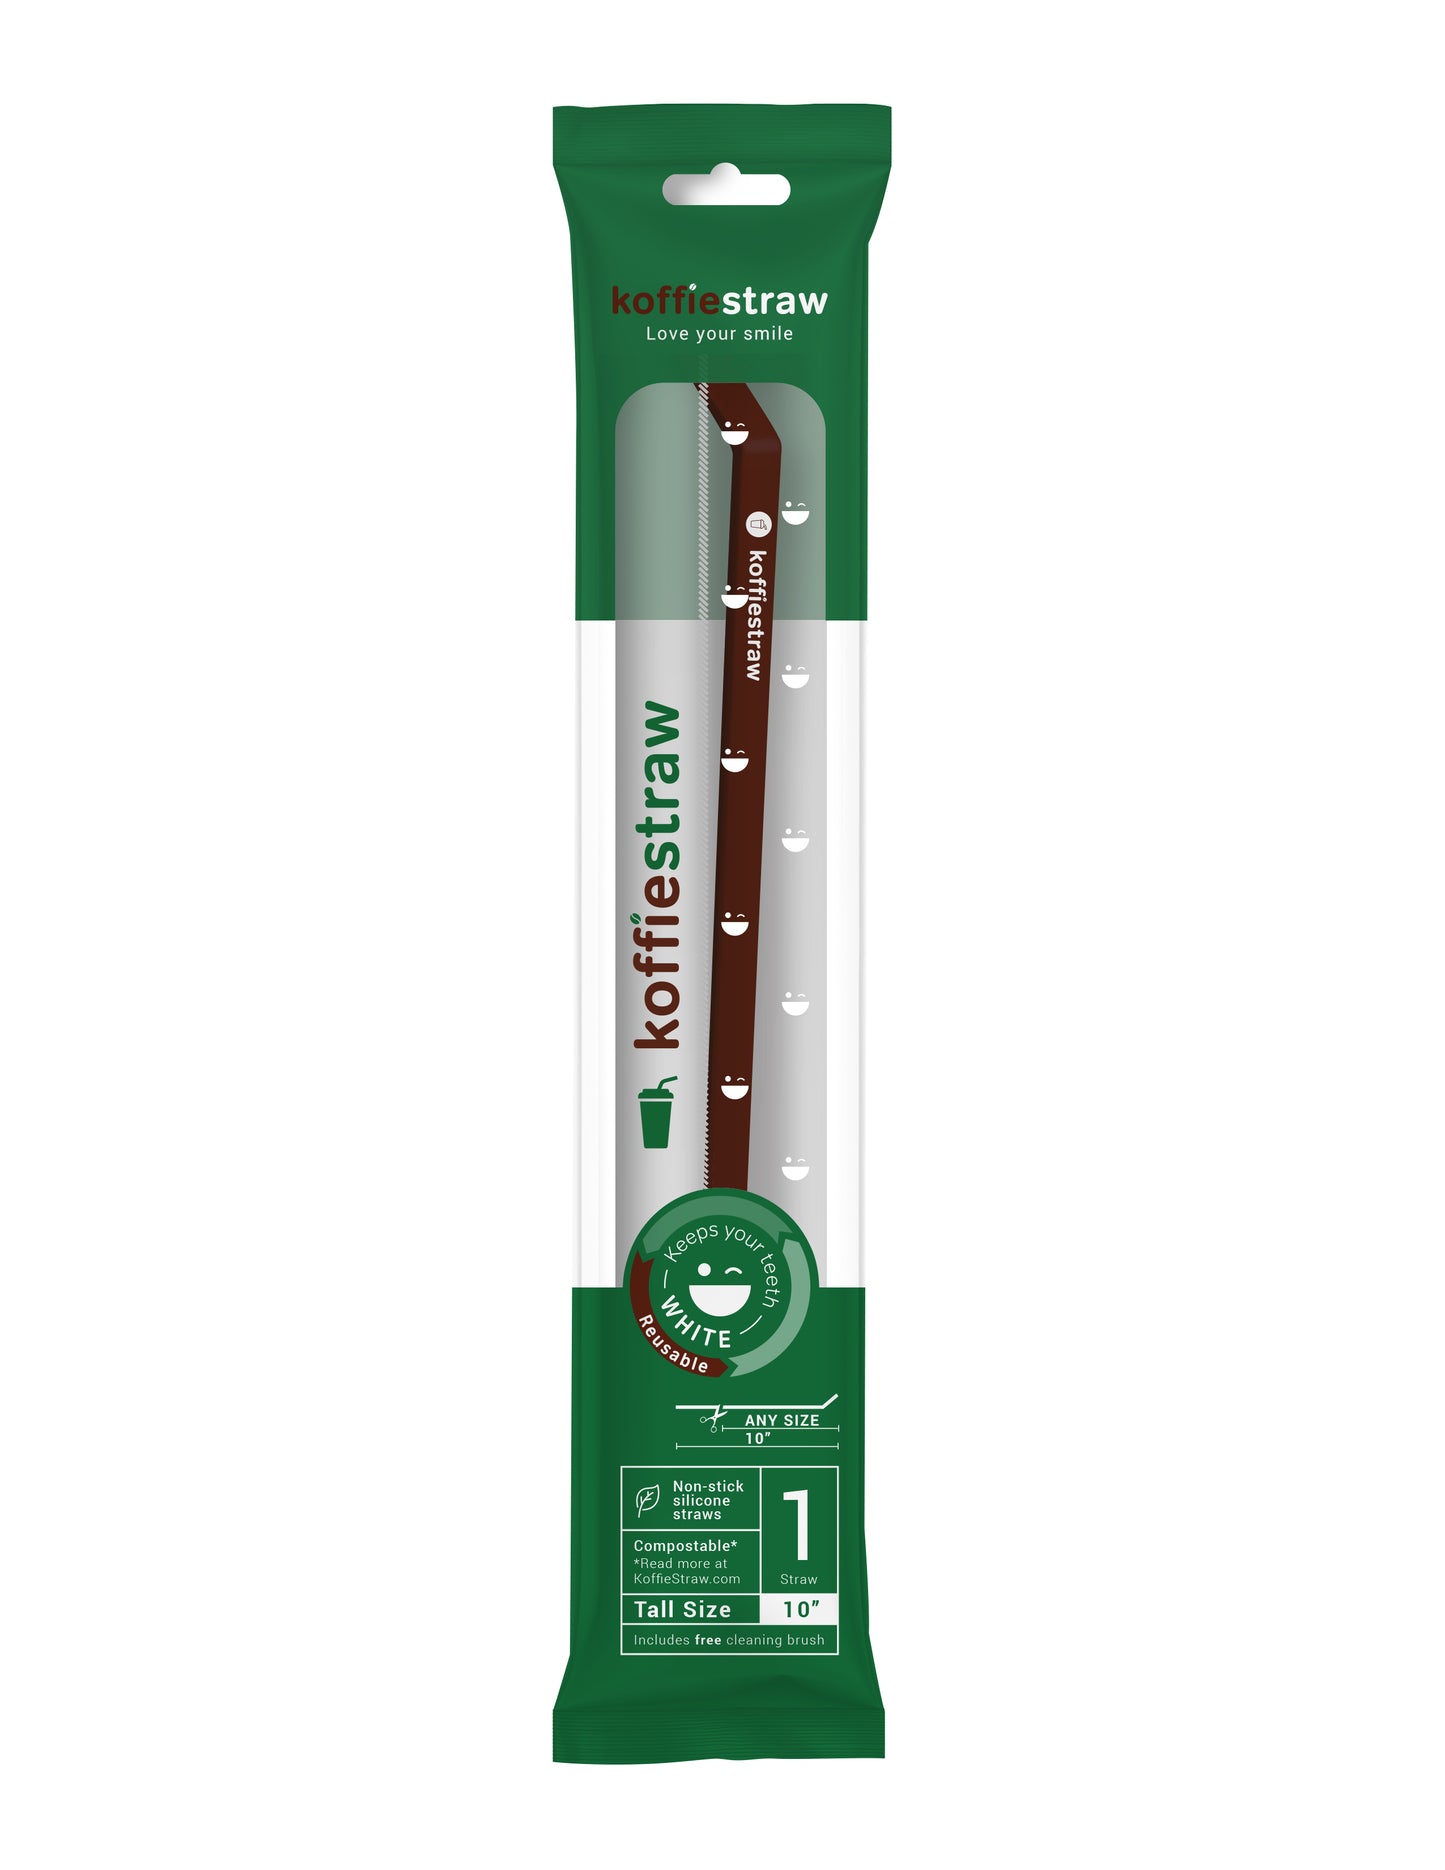 1-Pack of Mocha 10" KoffieStraw & stainless steel cleaning brush in a home compostable packaging